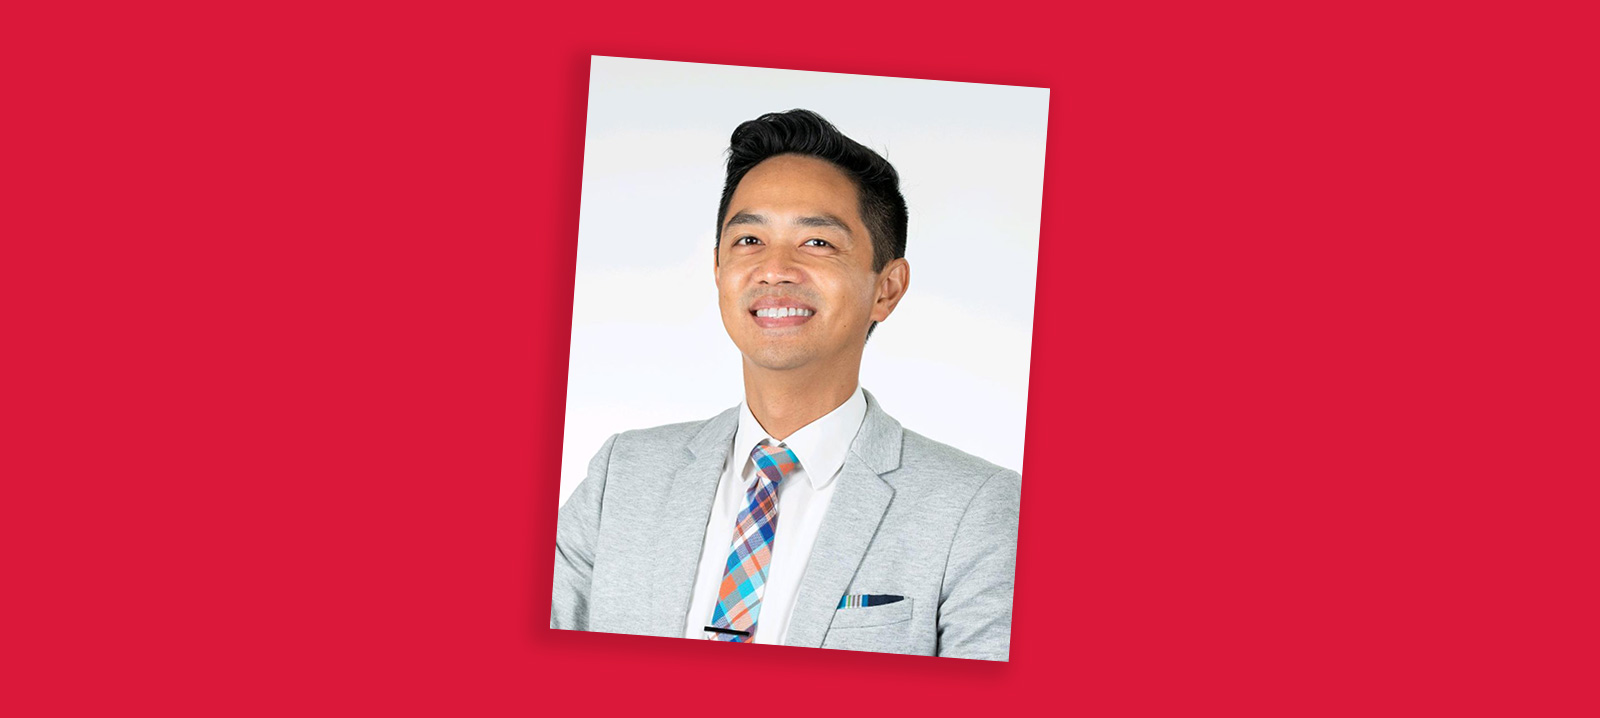 Want to Improve Your Business? Your Teams? Hit Goals? Then Listen to Rey Soriano!